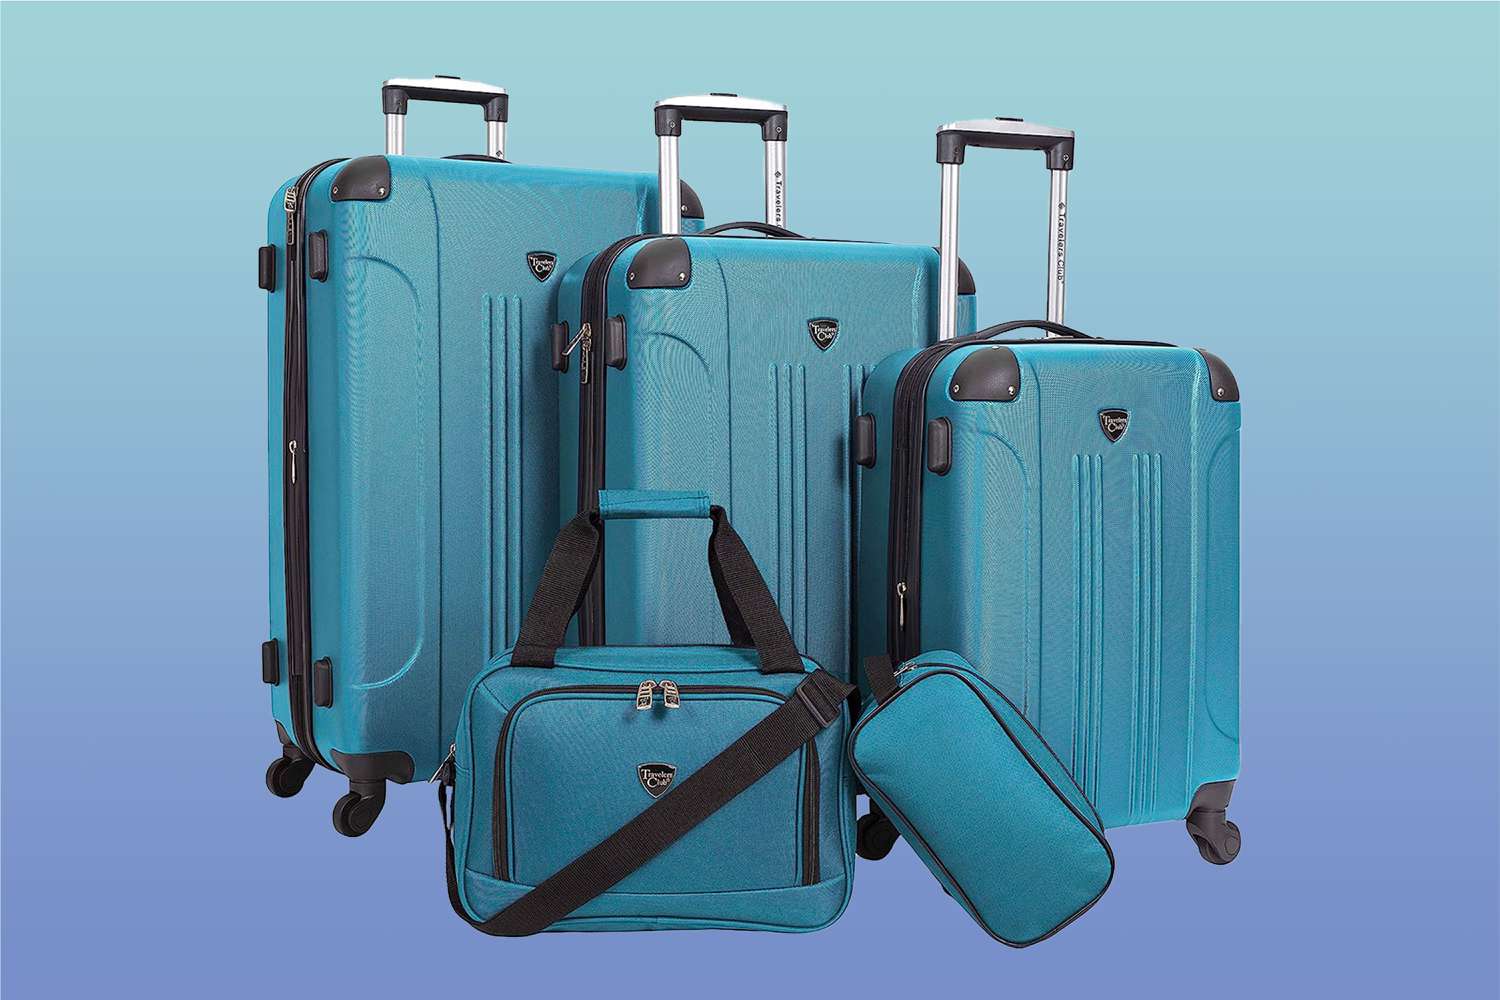 Luggage Set Review: The Perfect Travel Companion